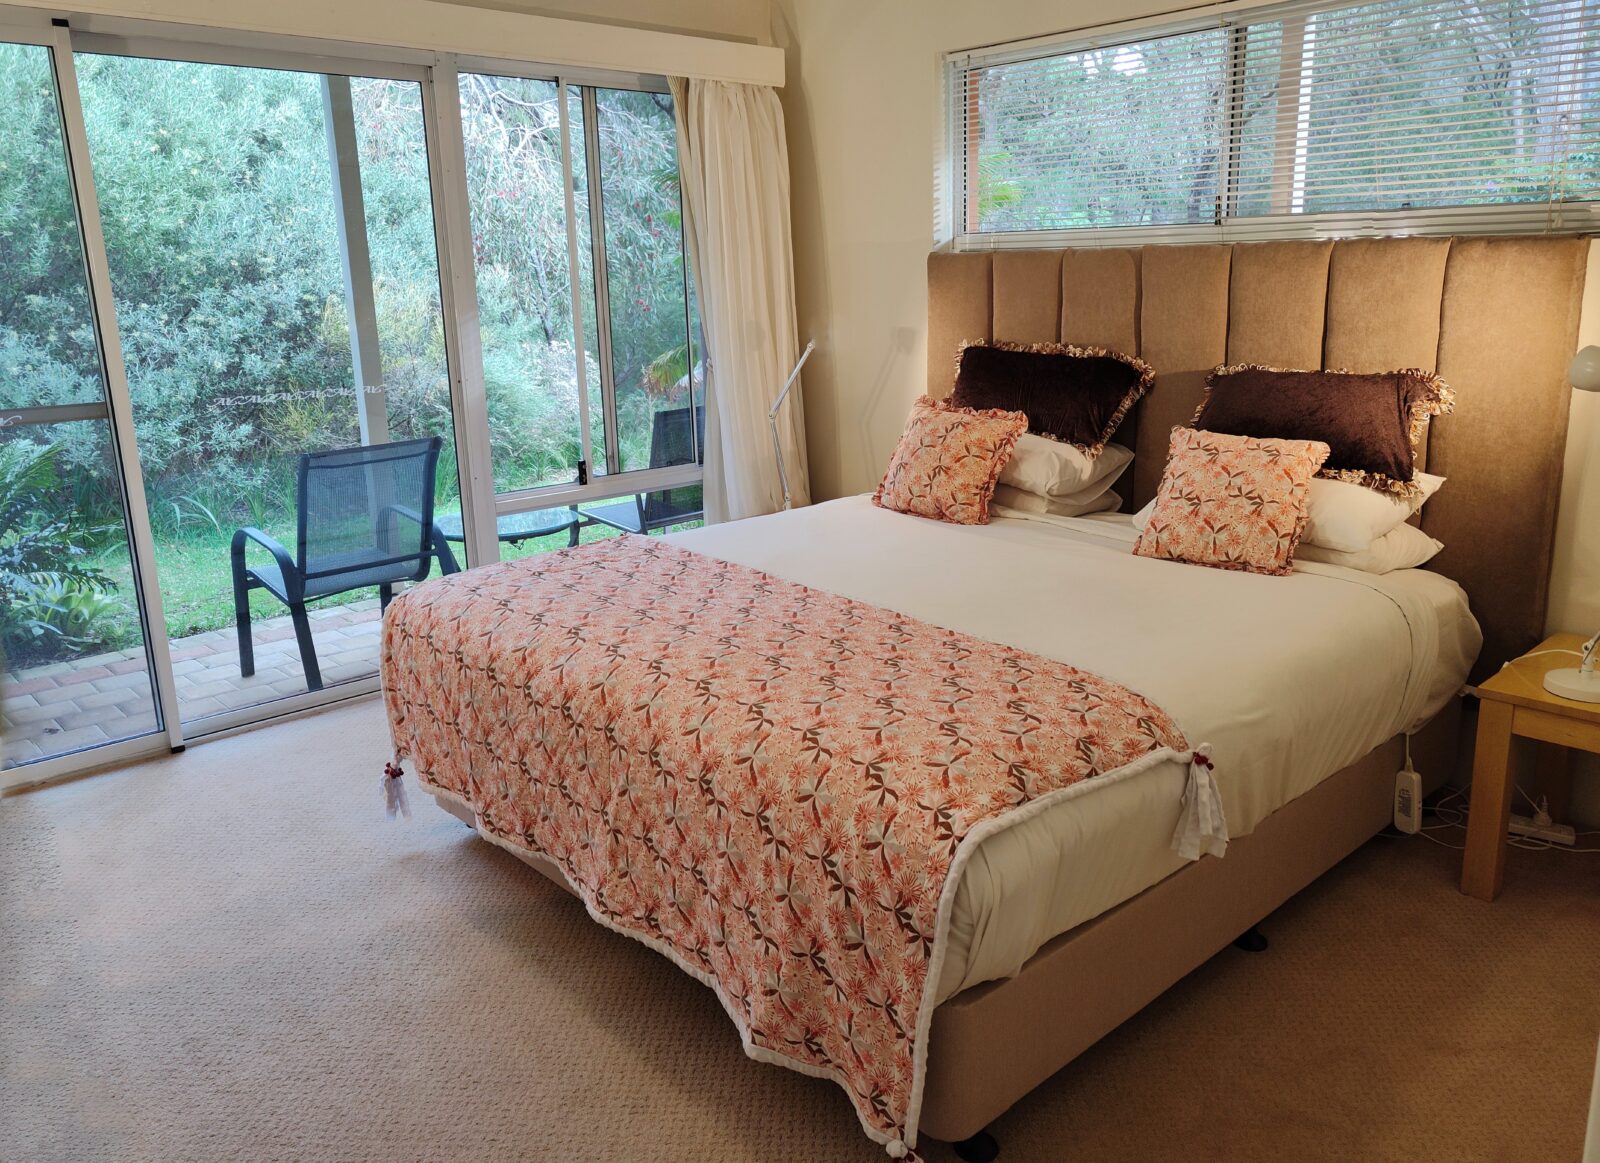 Margaret River BnB Redgate Room Bathroom King Bed with view to garden and forest